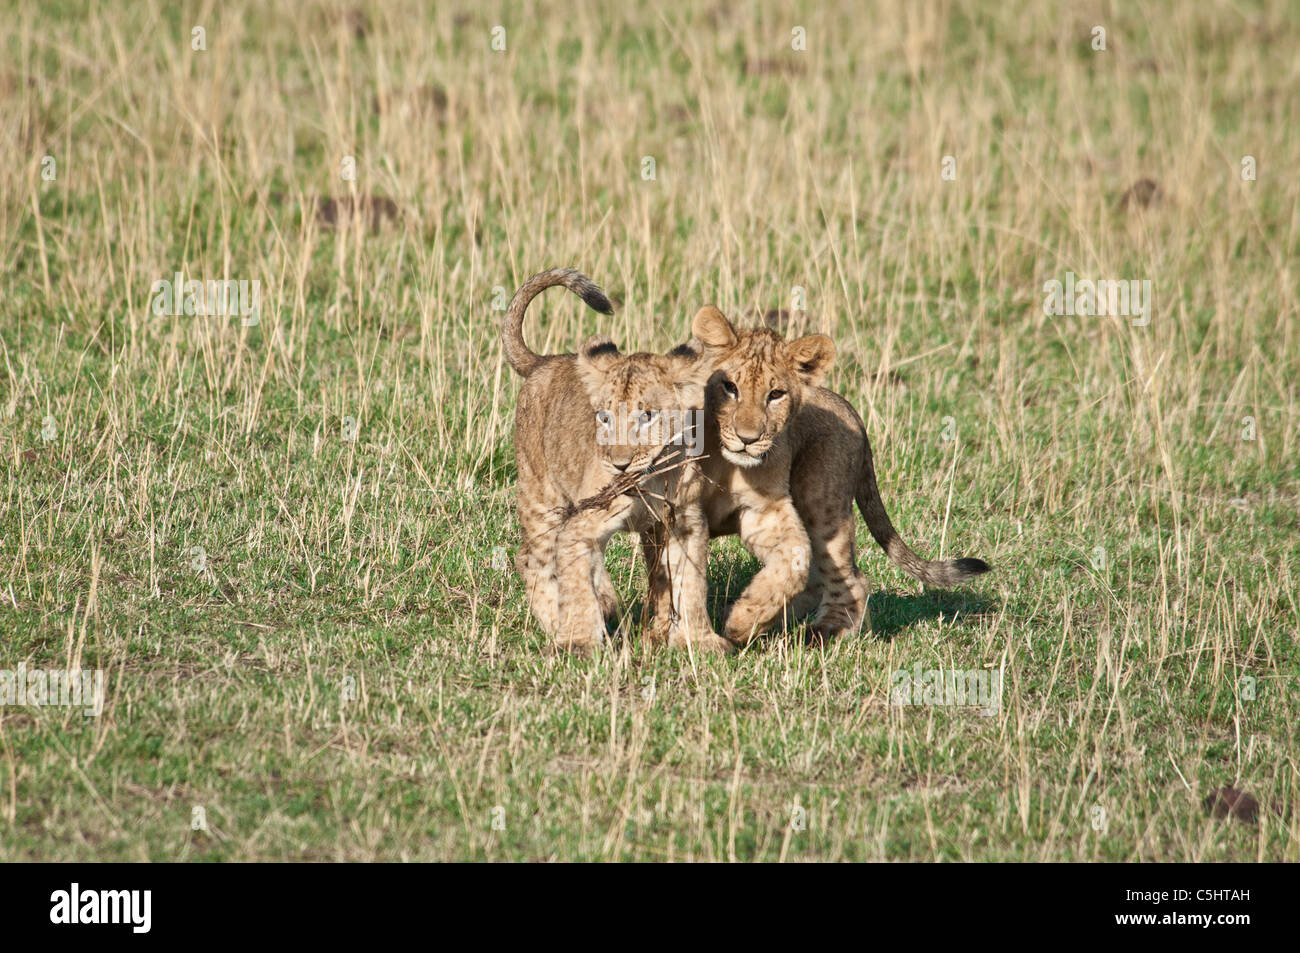 Two Lion Cubs side by side, Panthera leo, Masai Mara National Reserve, Kenya, Africa Stock Photo